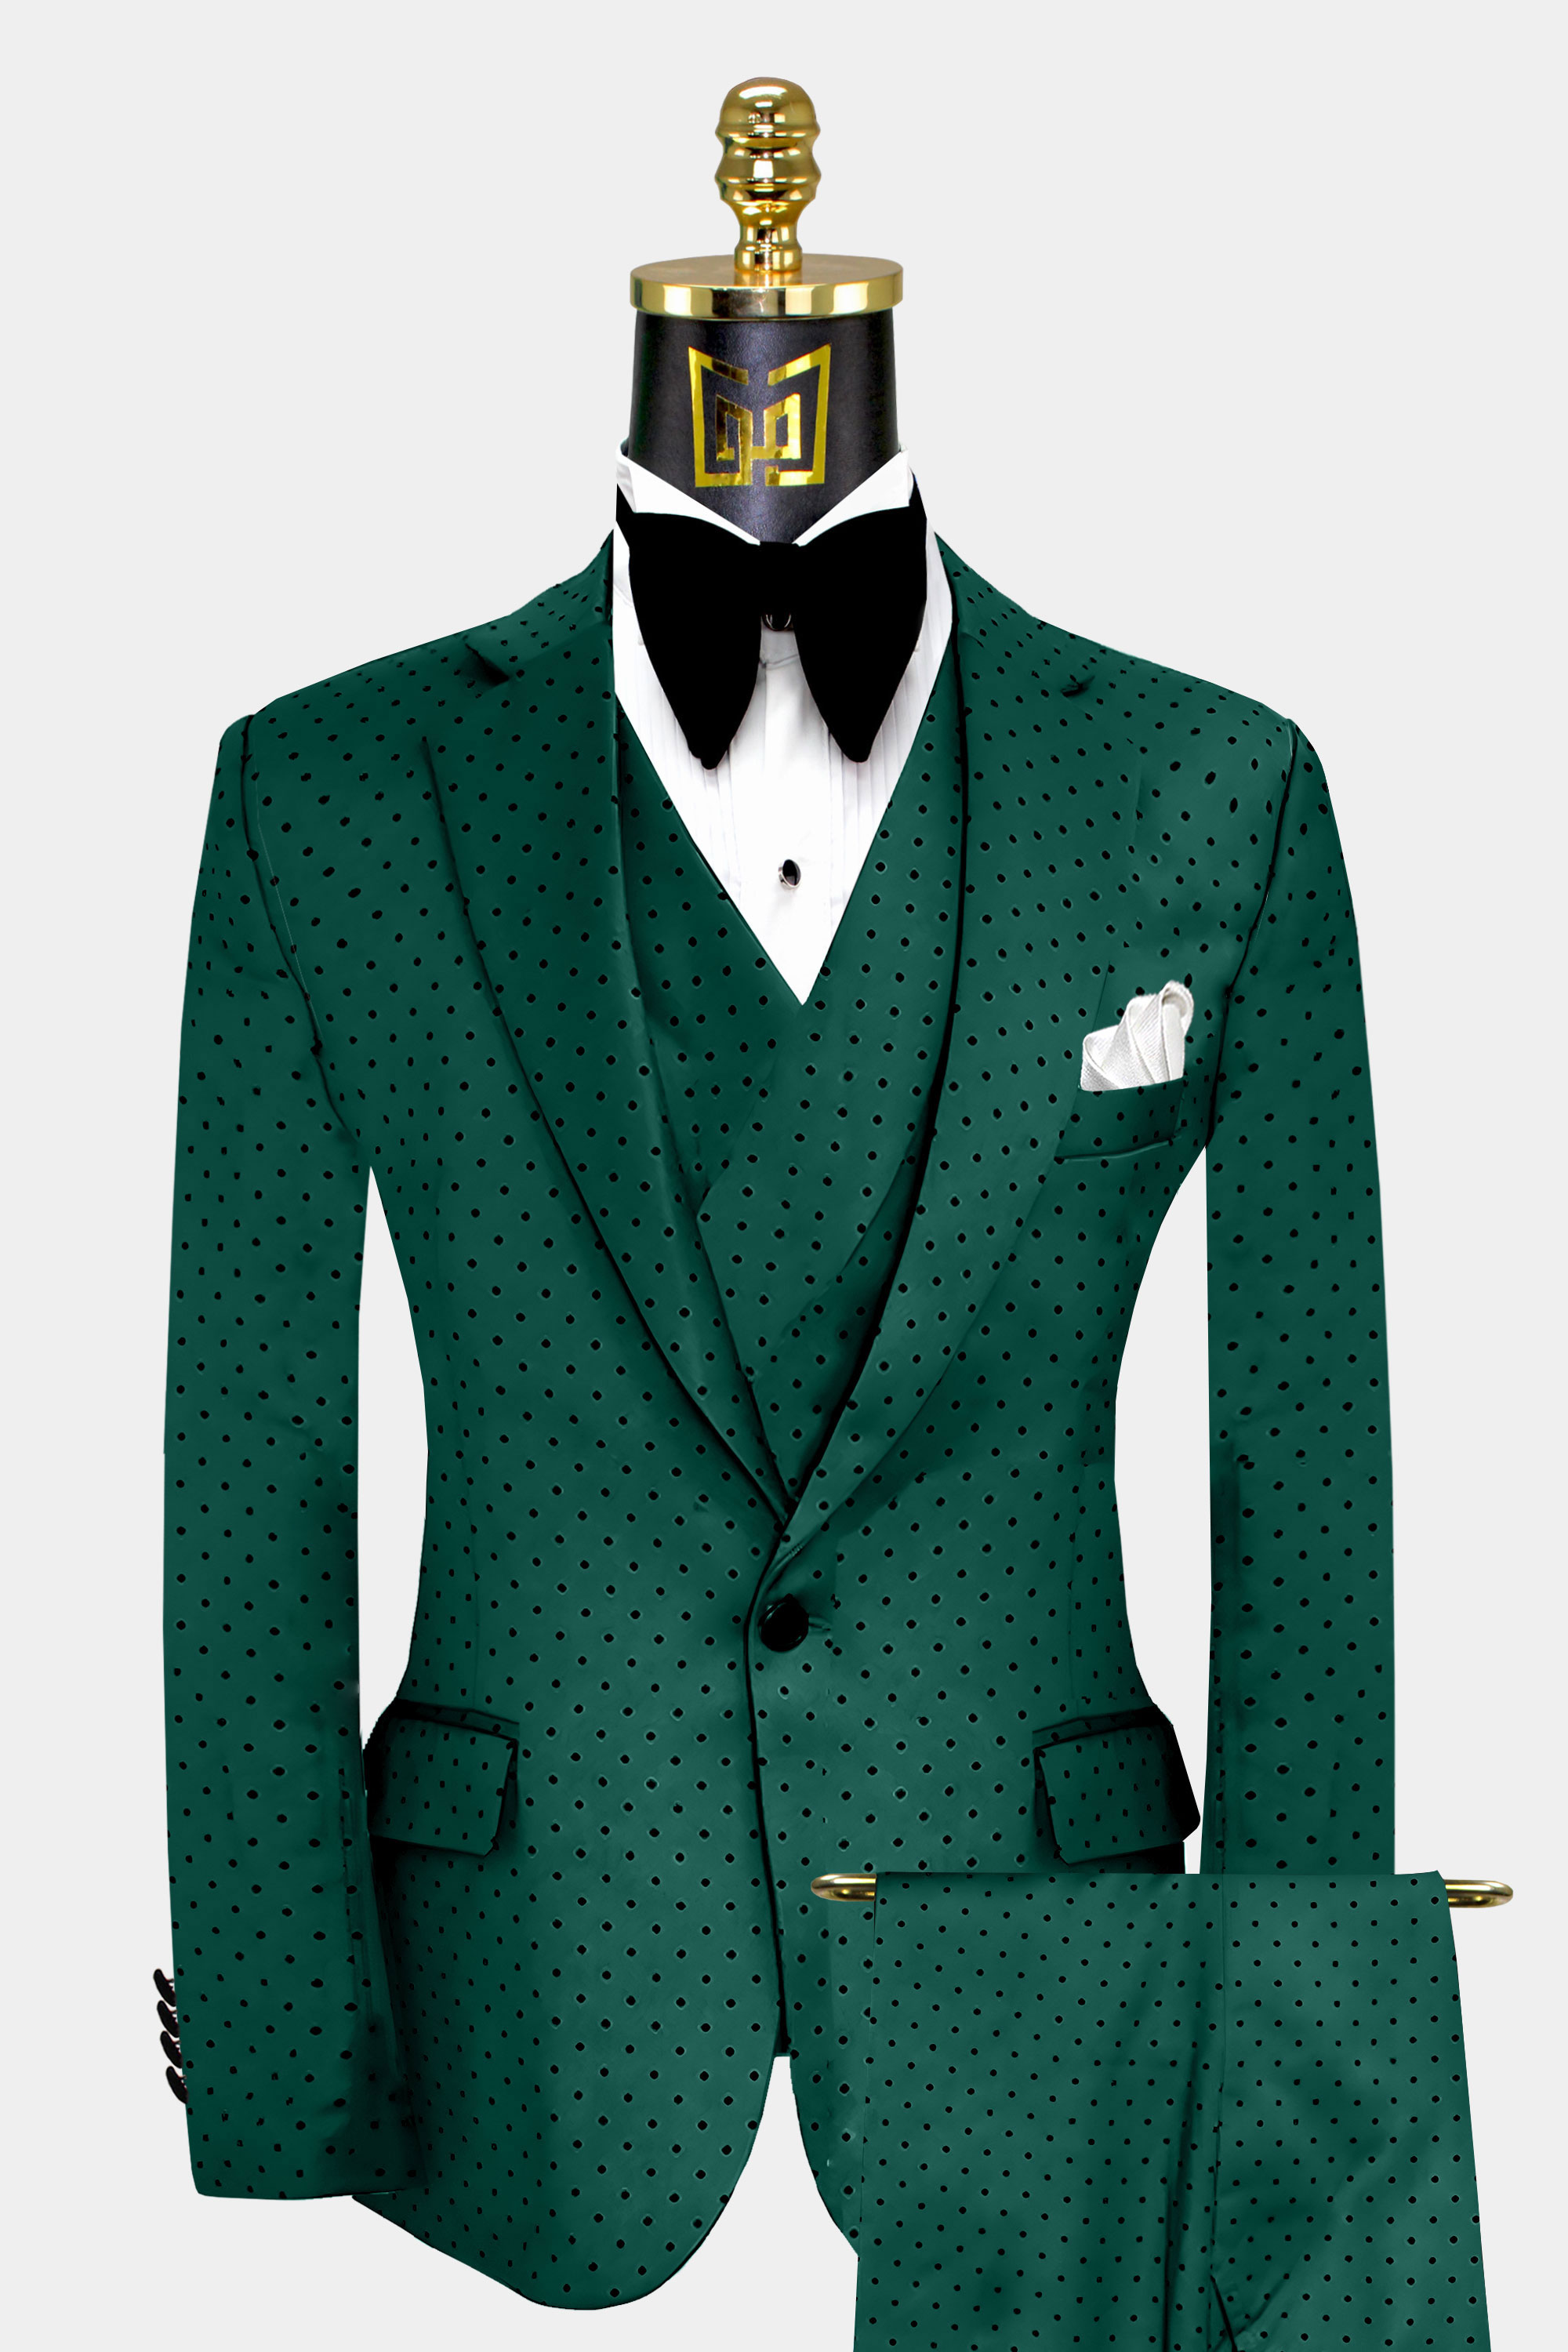 Emerald Green Suit | vlr.eng.br